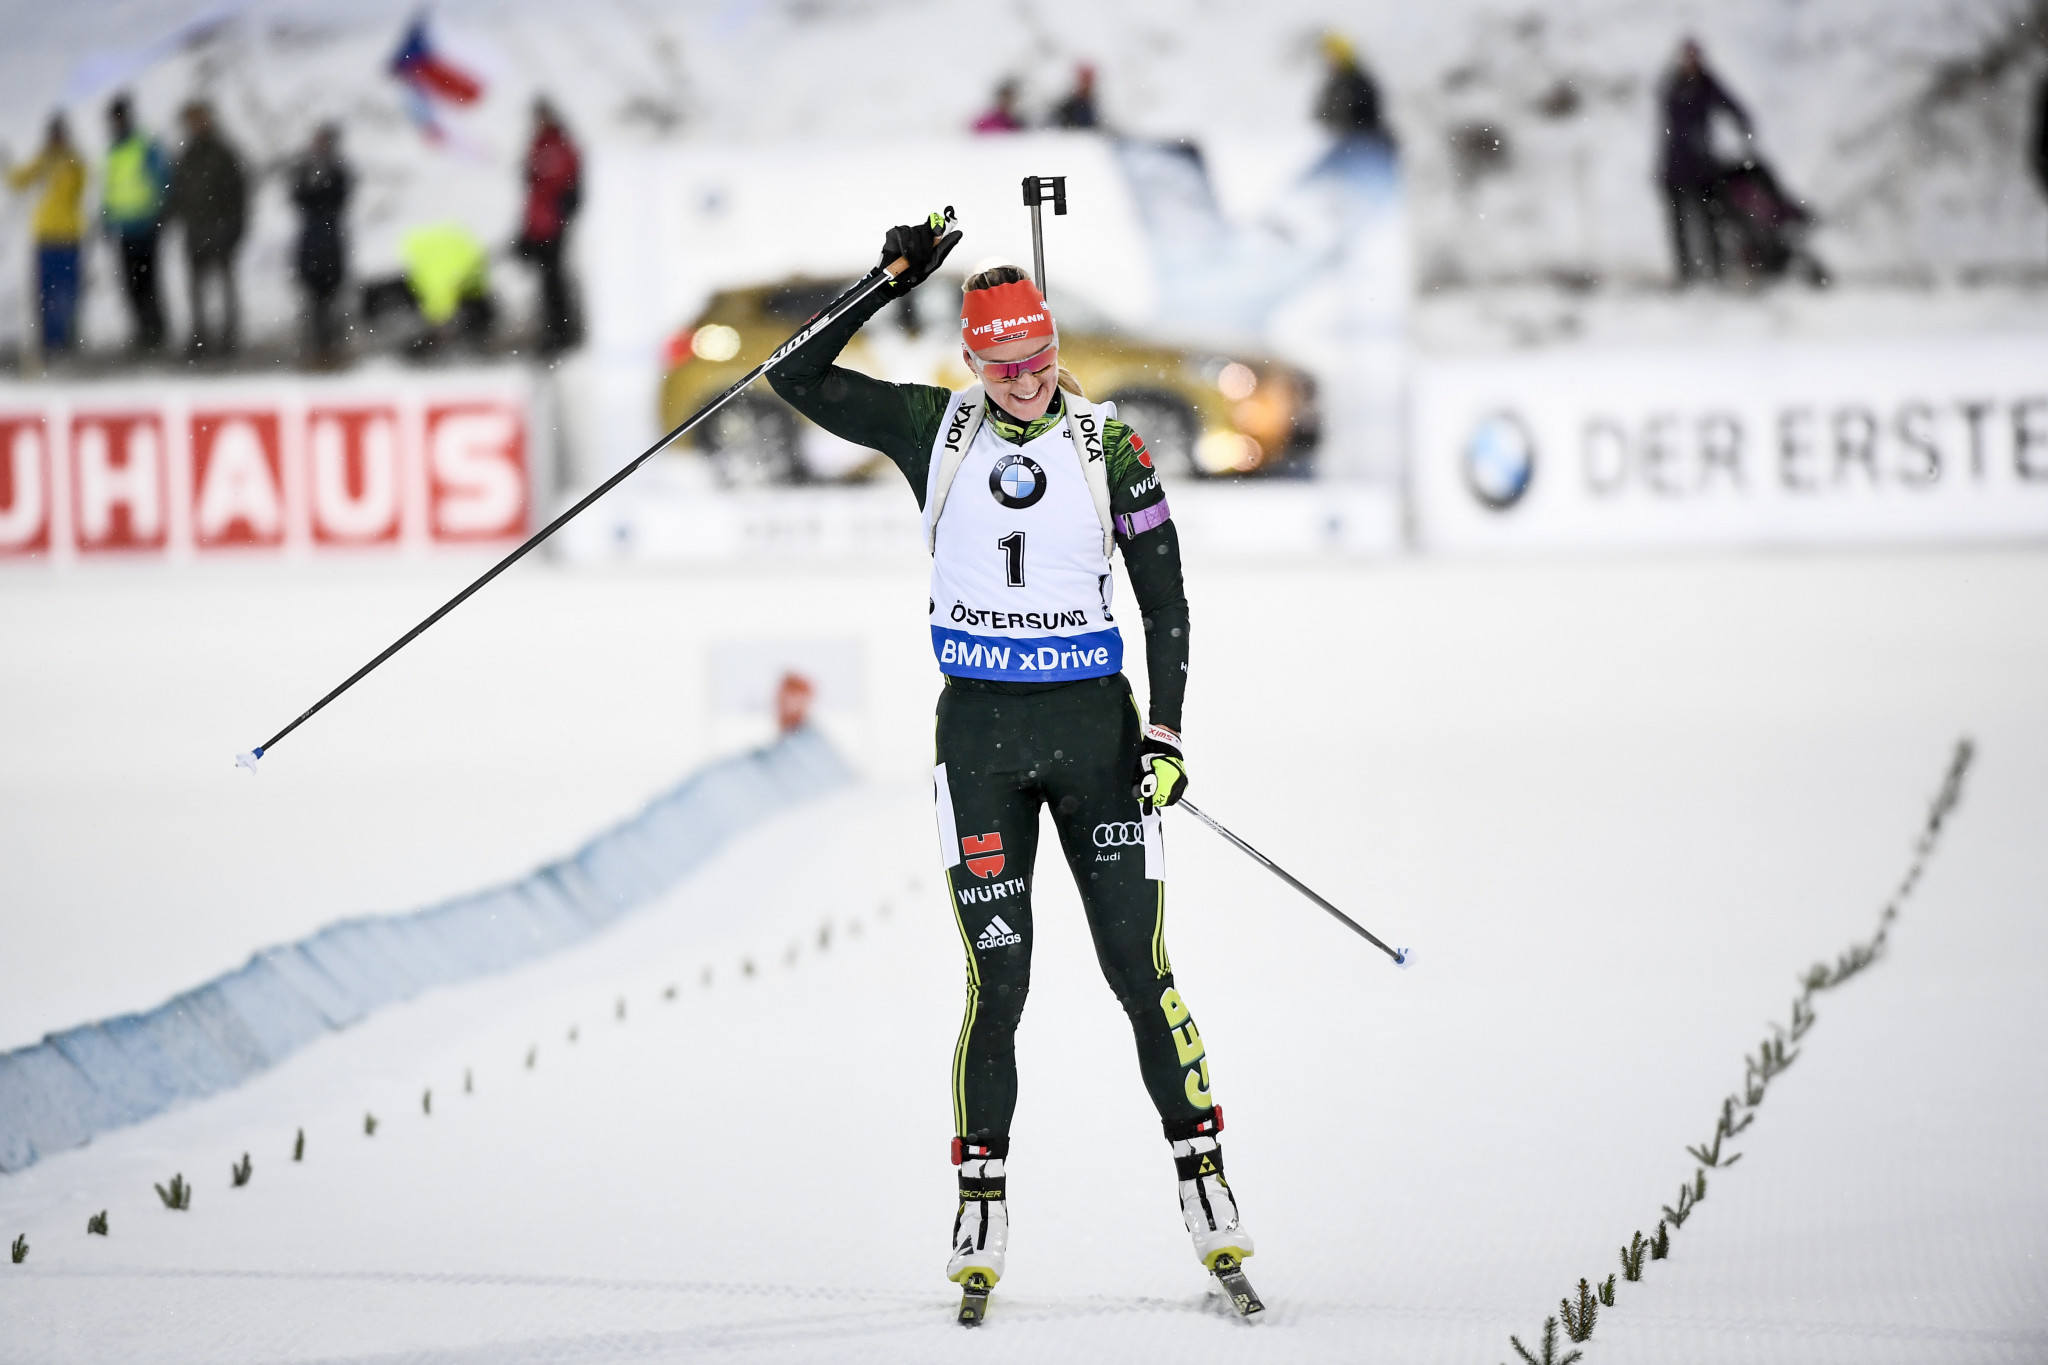 Olympic cross-country skiing bronze medallist Denise Herrmann of Germany will aim to secure a third straight victory following two wins in the season opener in Östersund ©Getty Imahes